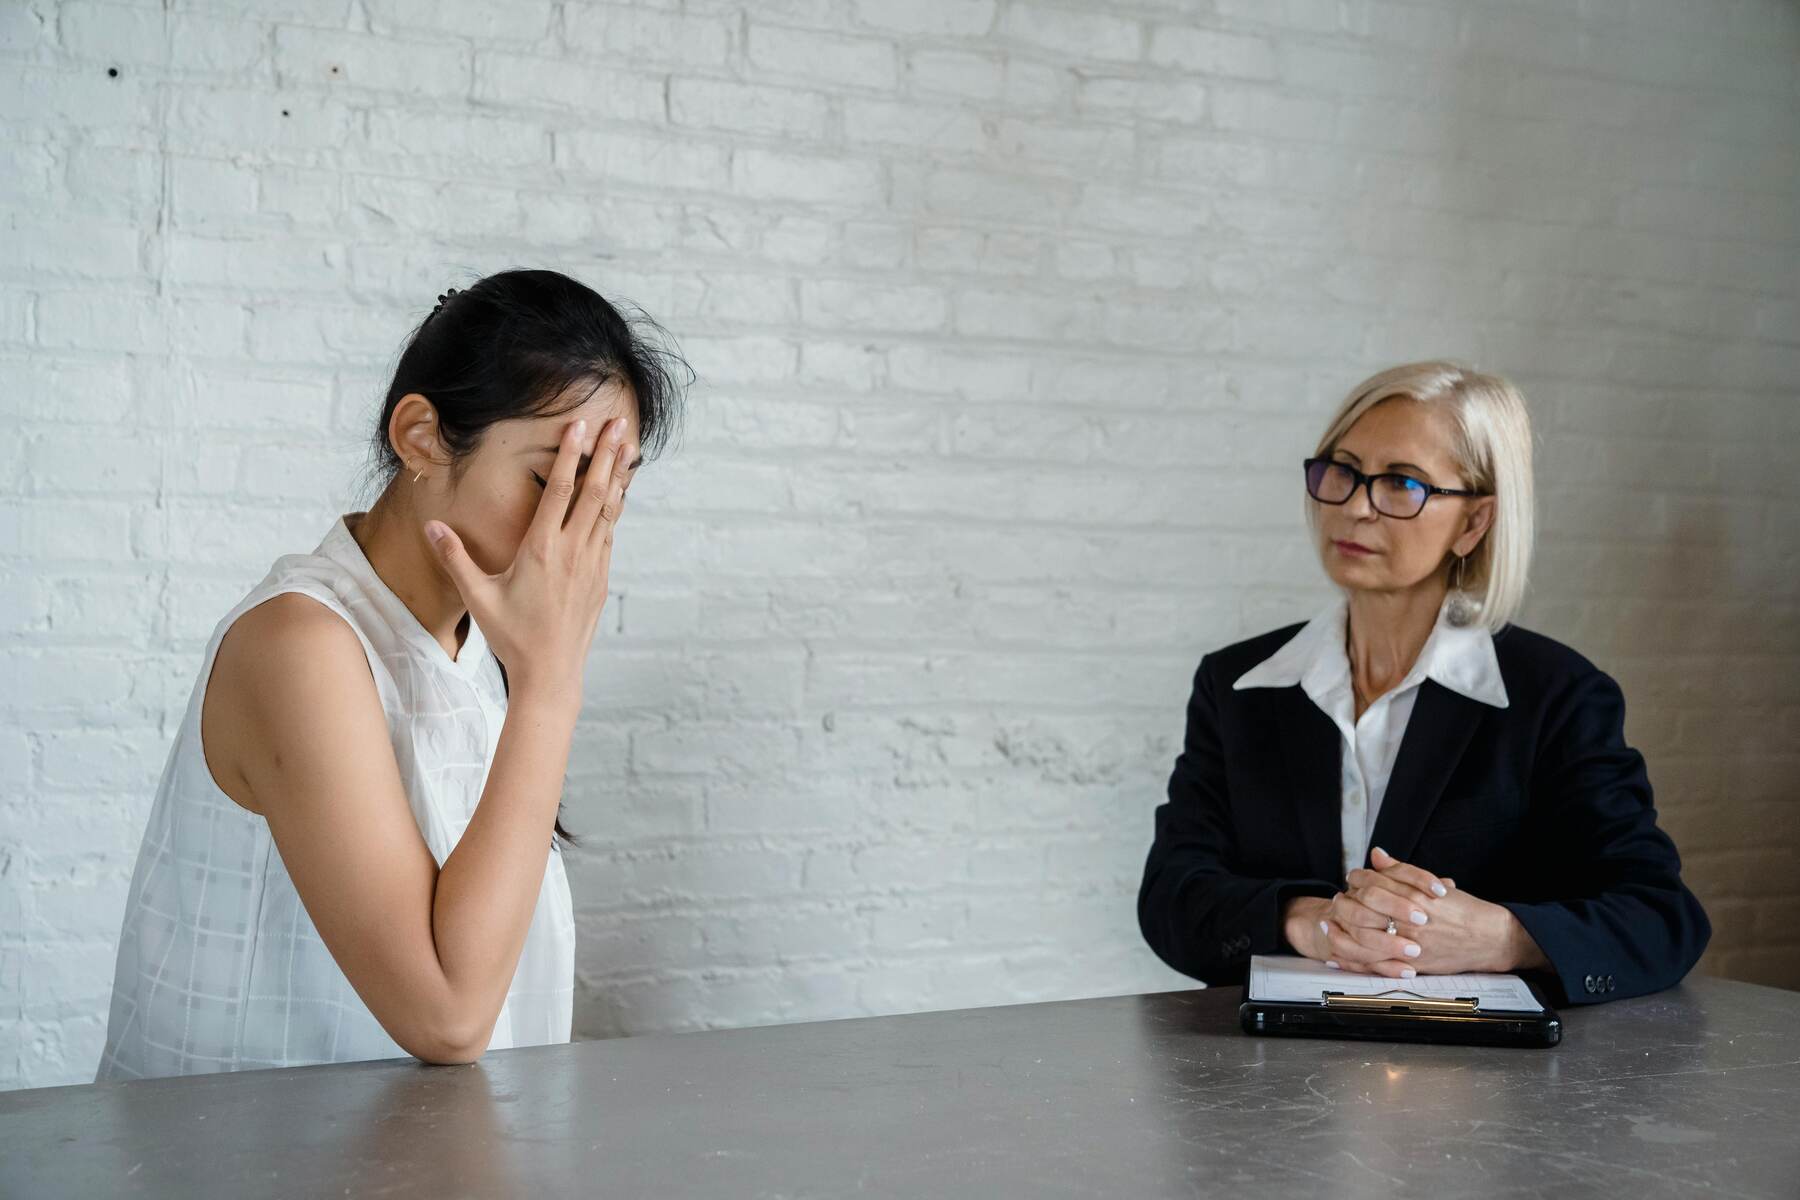 A behavior analyst talking to a frustrated client